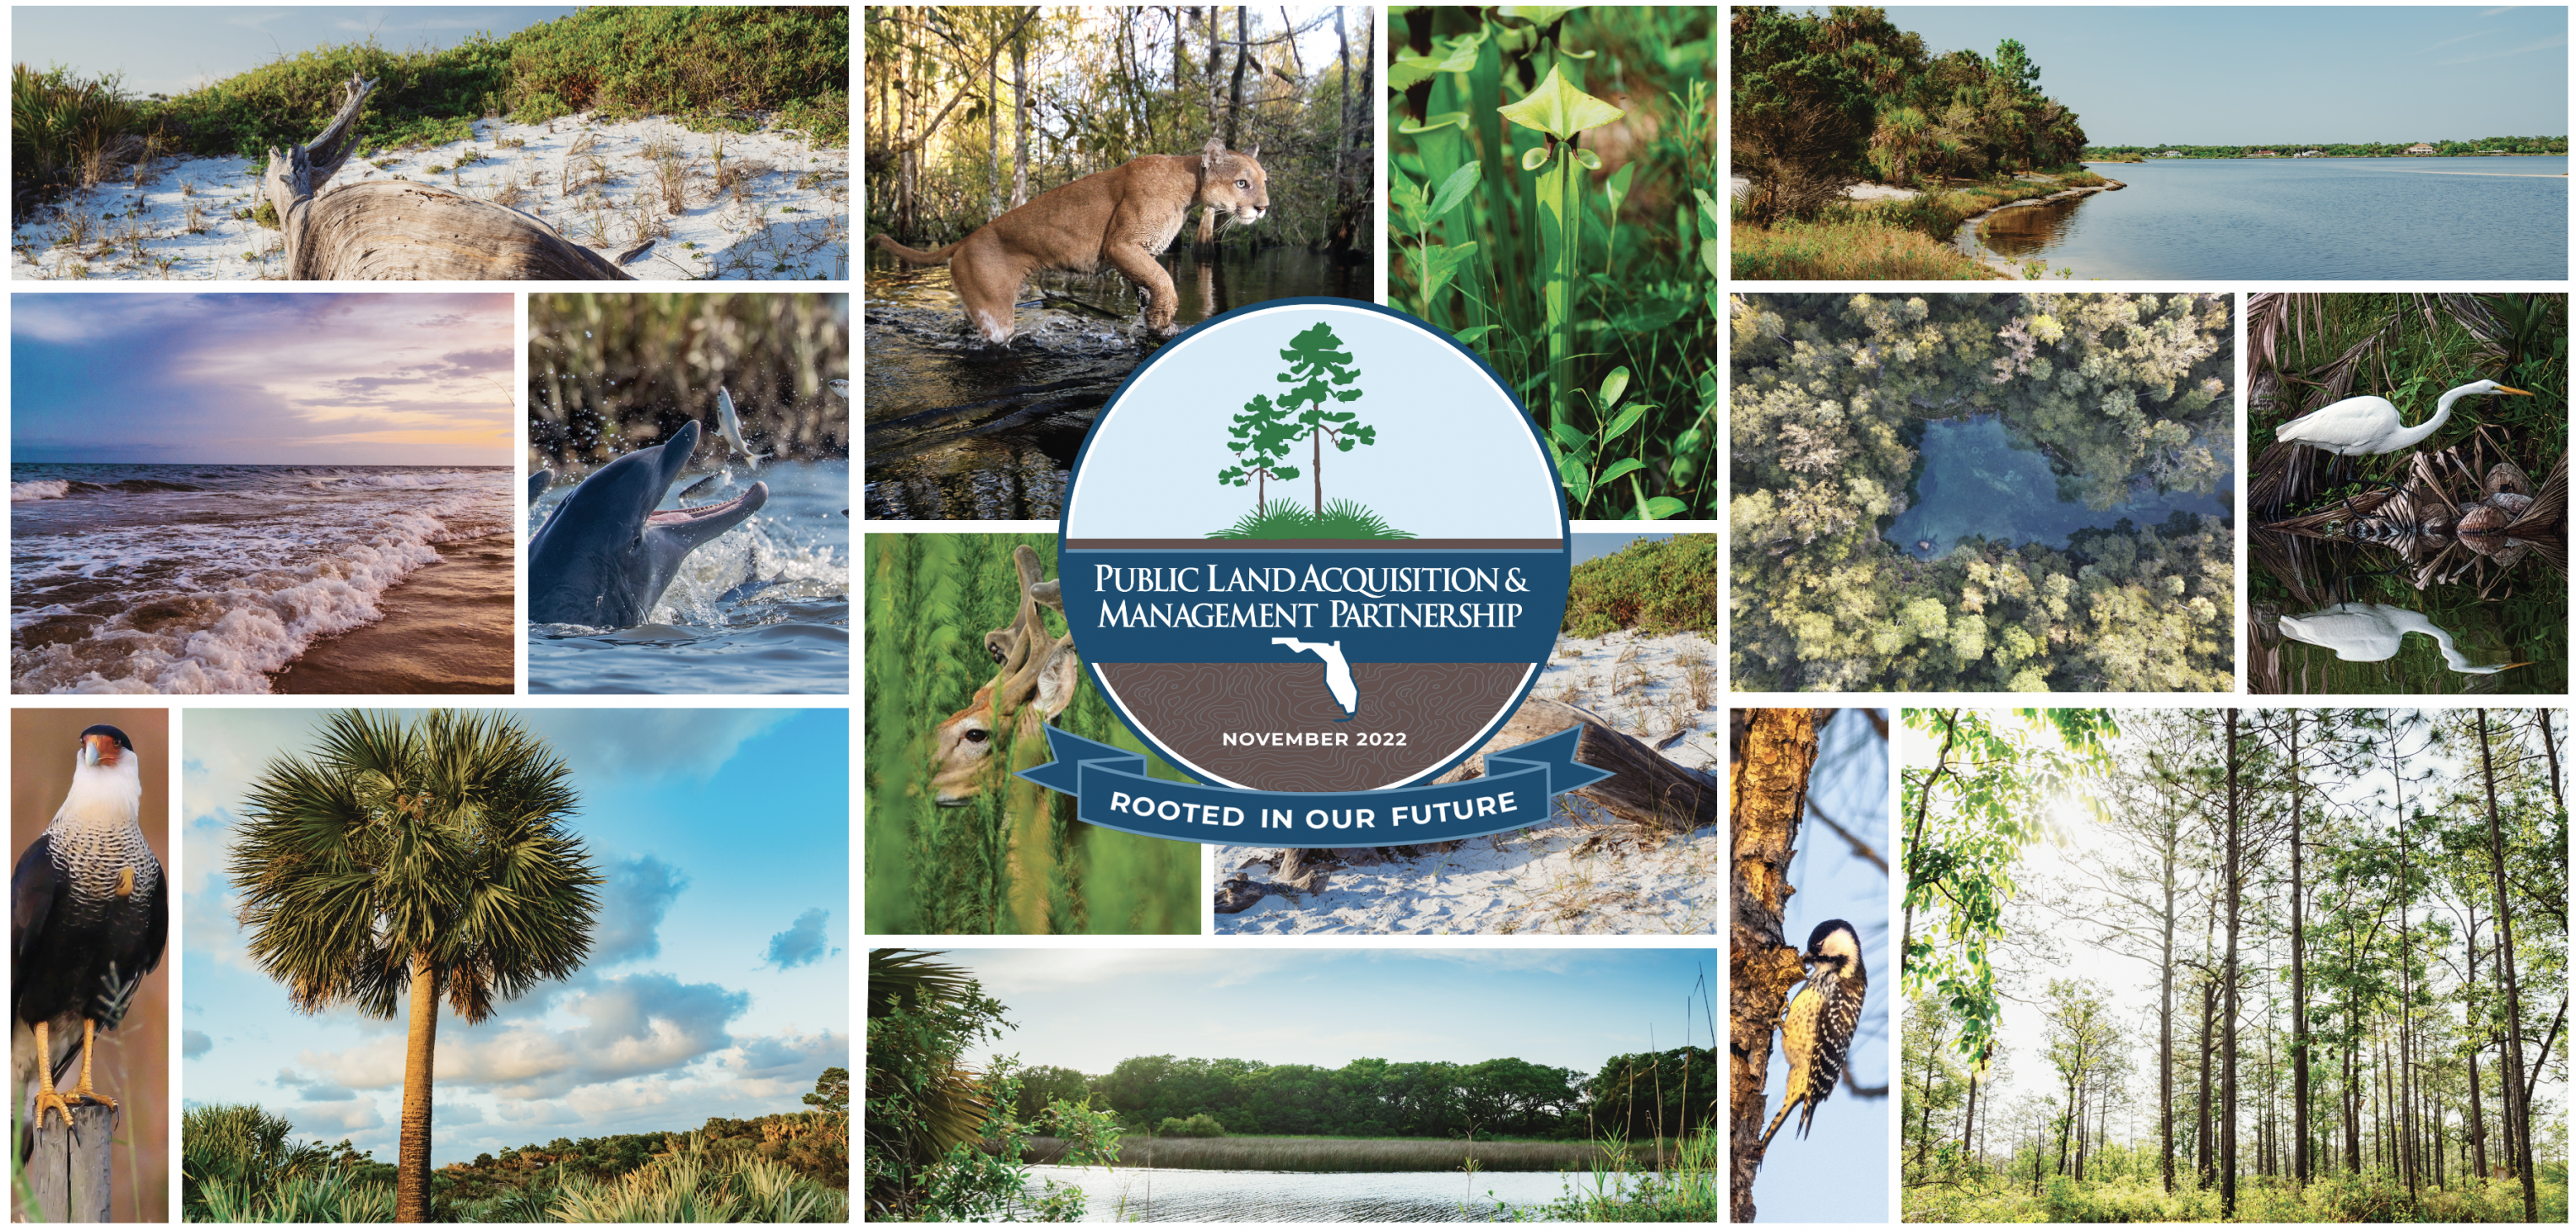 Public Land Acquisition and Management Partnership (PLAM) - Rooted in Our Future